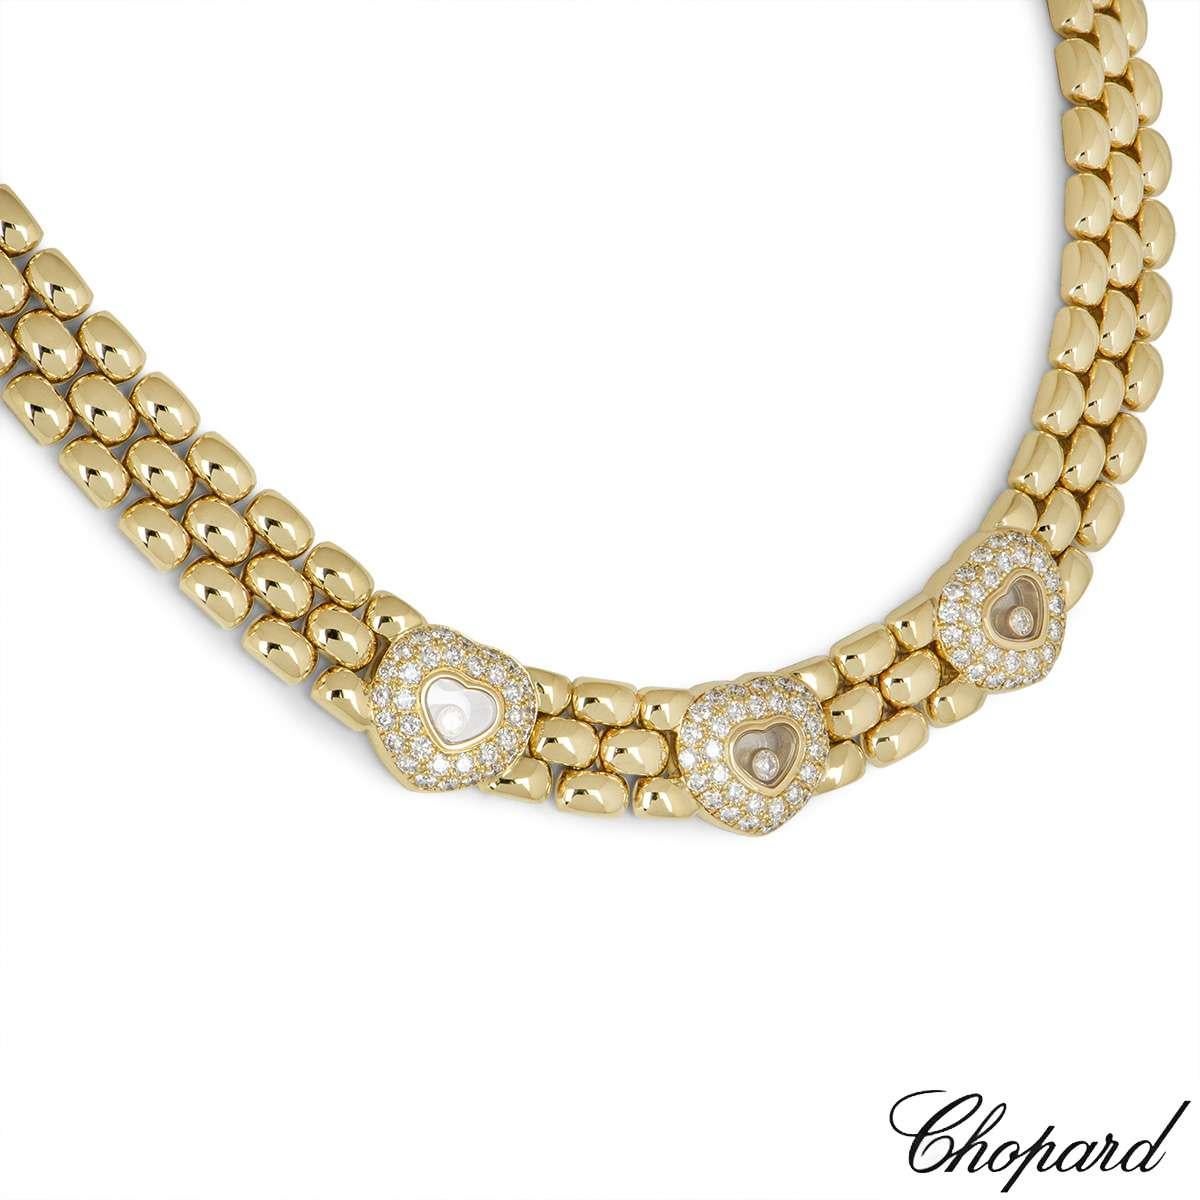 A beautiful 18k yellow gold heart necklace by Chopard from the Happy Diamonds collection. The necklace features 3 heart motifs pave set with round brilliant cut diamonds, with the iconic Chopard signed glass in the centre encasing a single floating